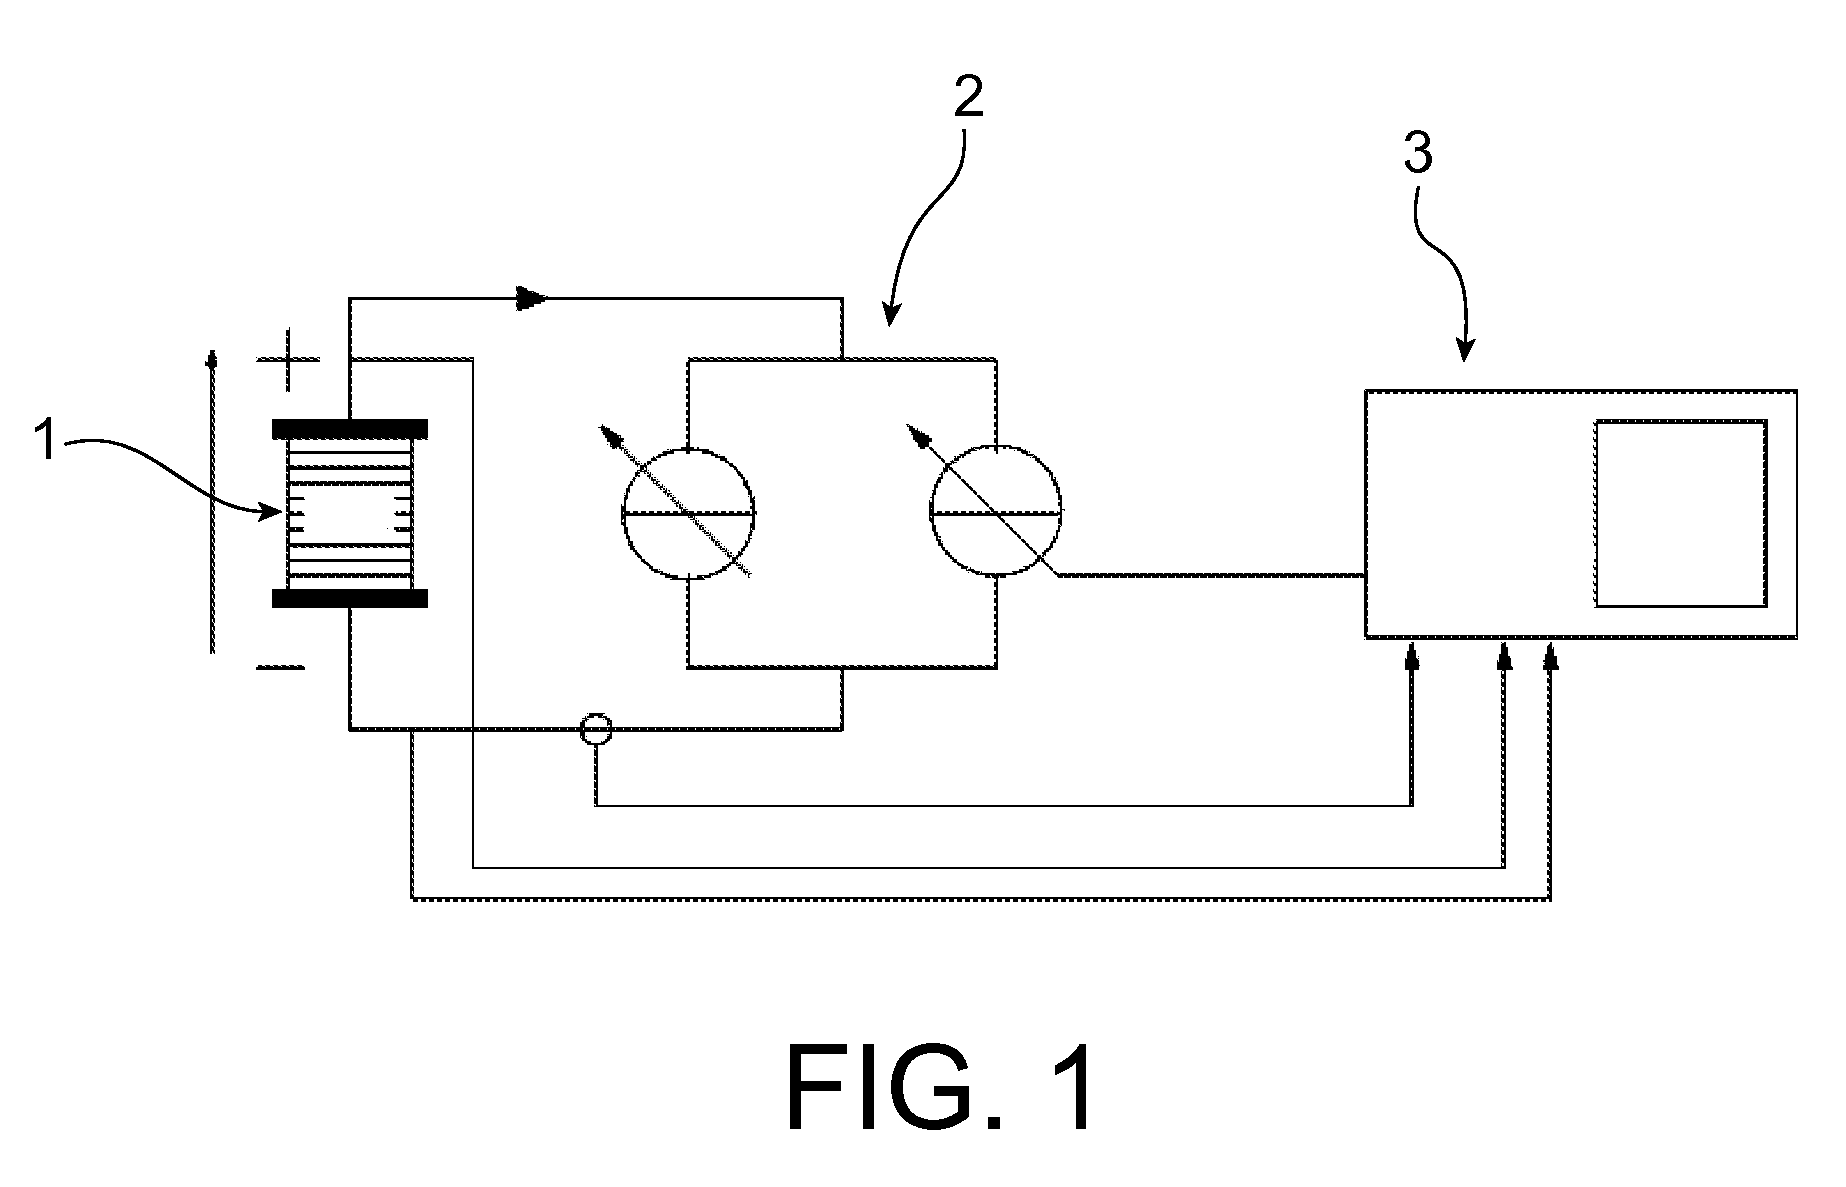 Method for characterizing an electrical system by impedance spectroscopy